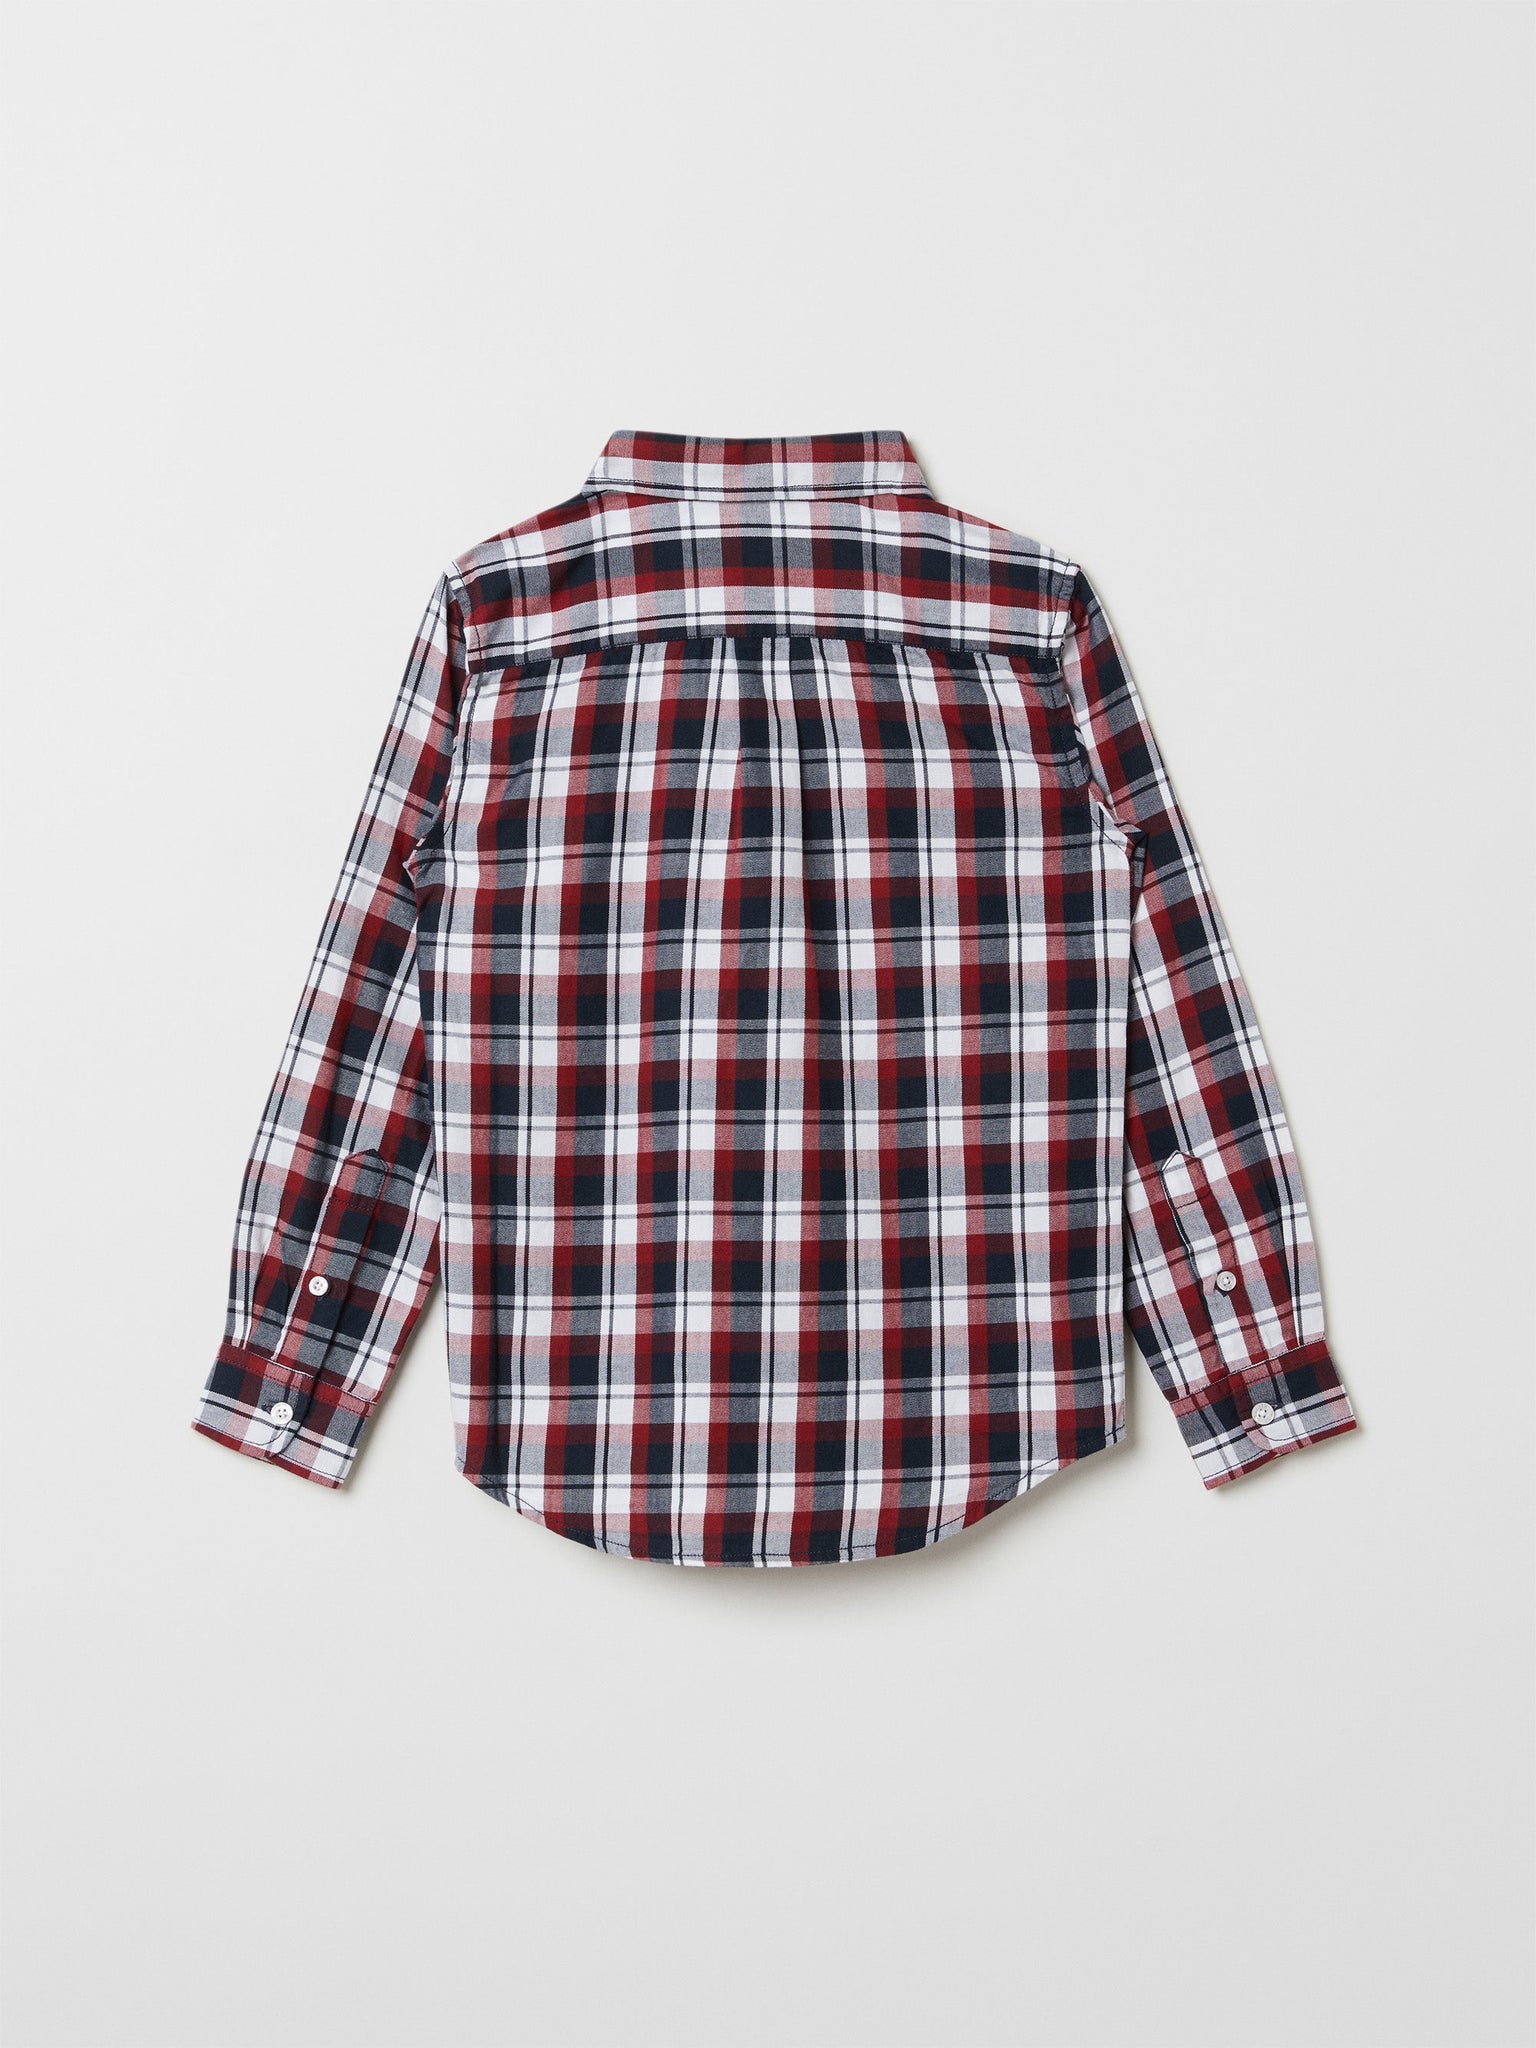 Organic Cotton Checked Kids Shirt from the Polarn O. Pyret kidswear collection. Nordic kids clothes made from sustainable sources.